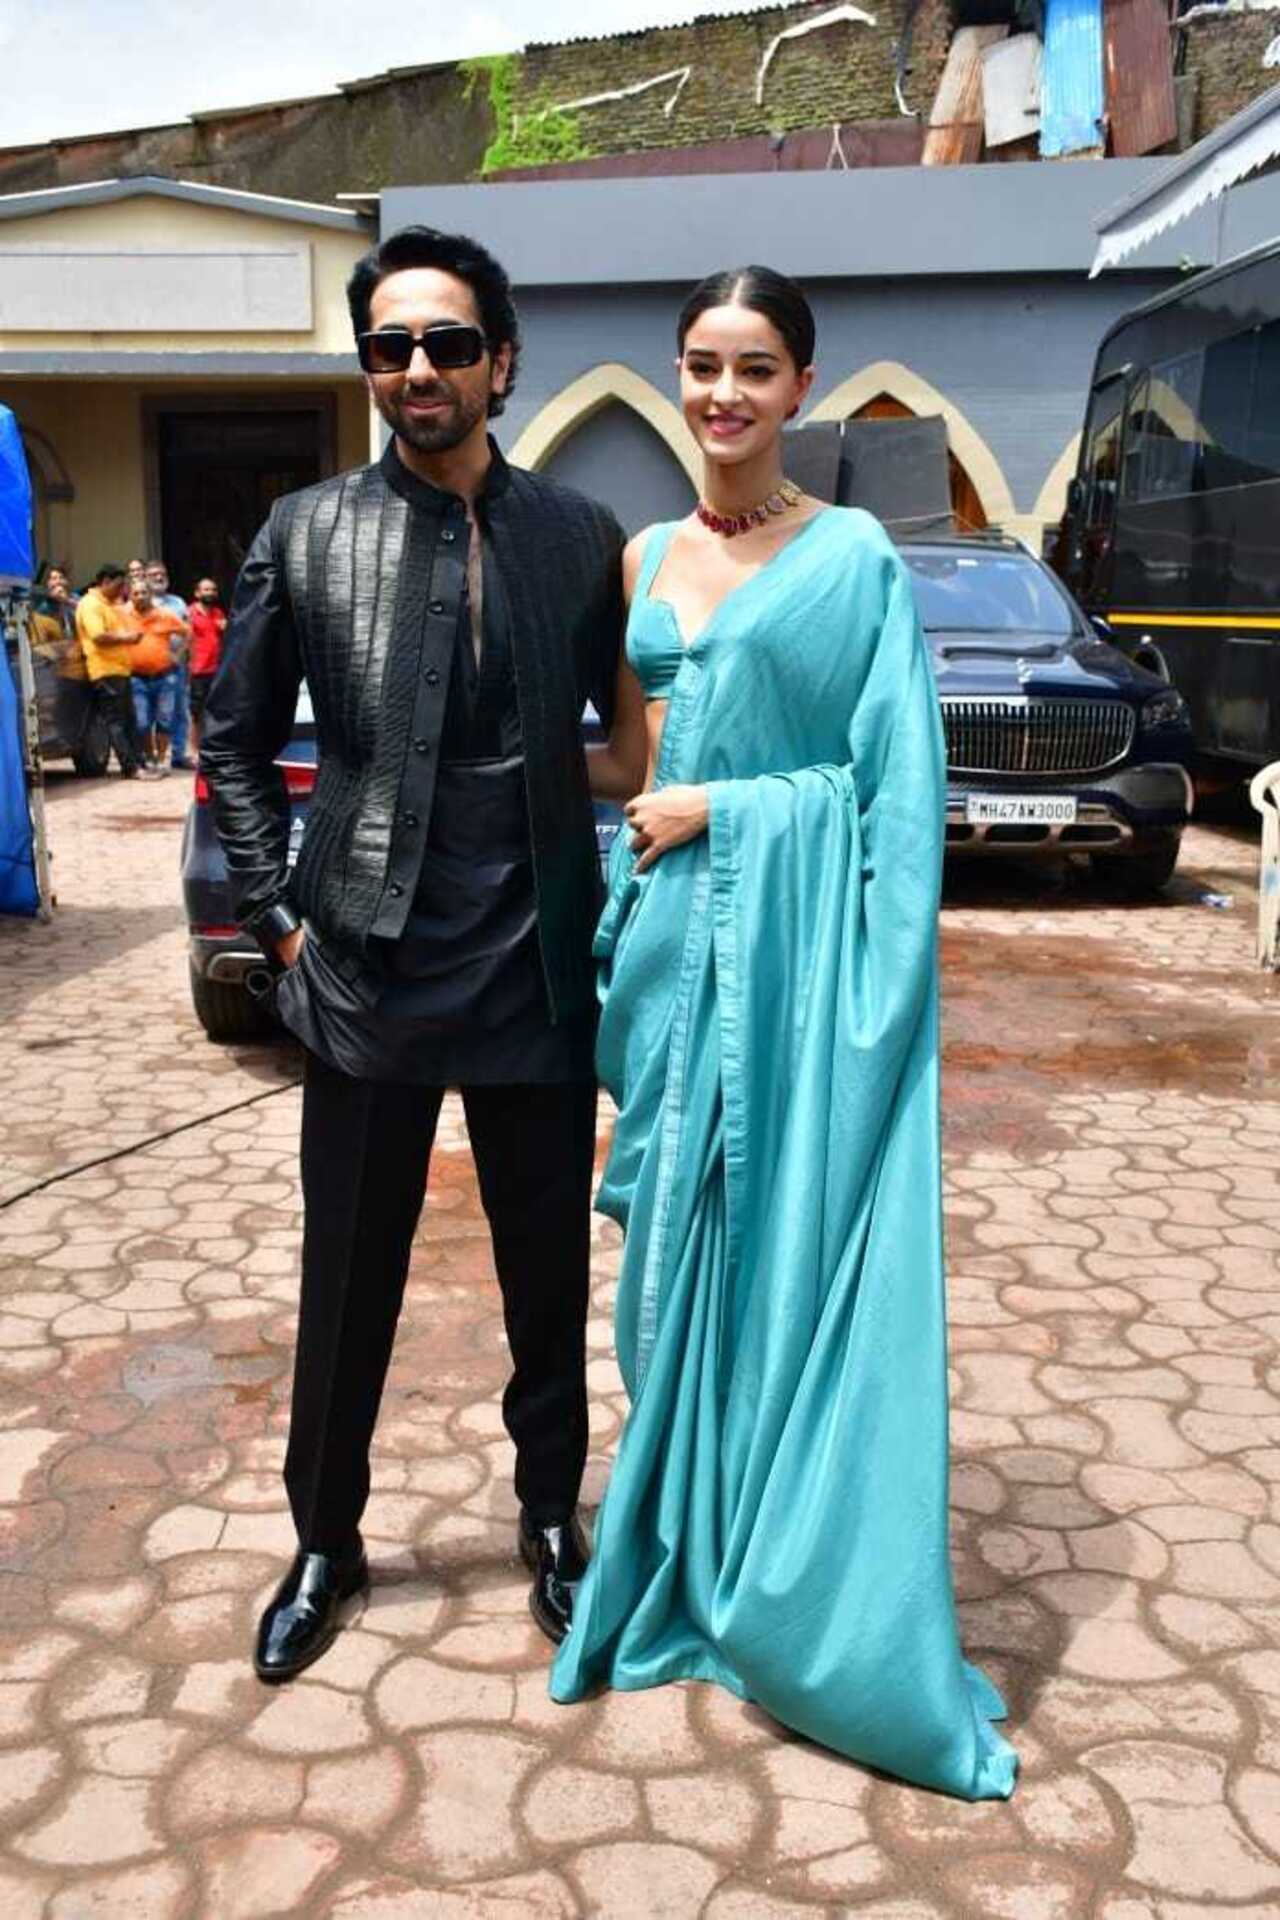 Later in the day, Ayushmann and Ananya were snapped again in a totally different look